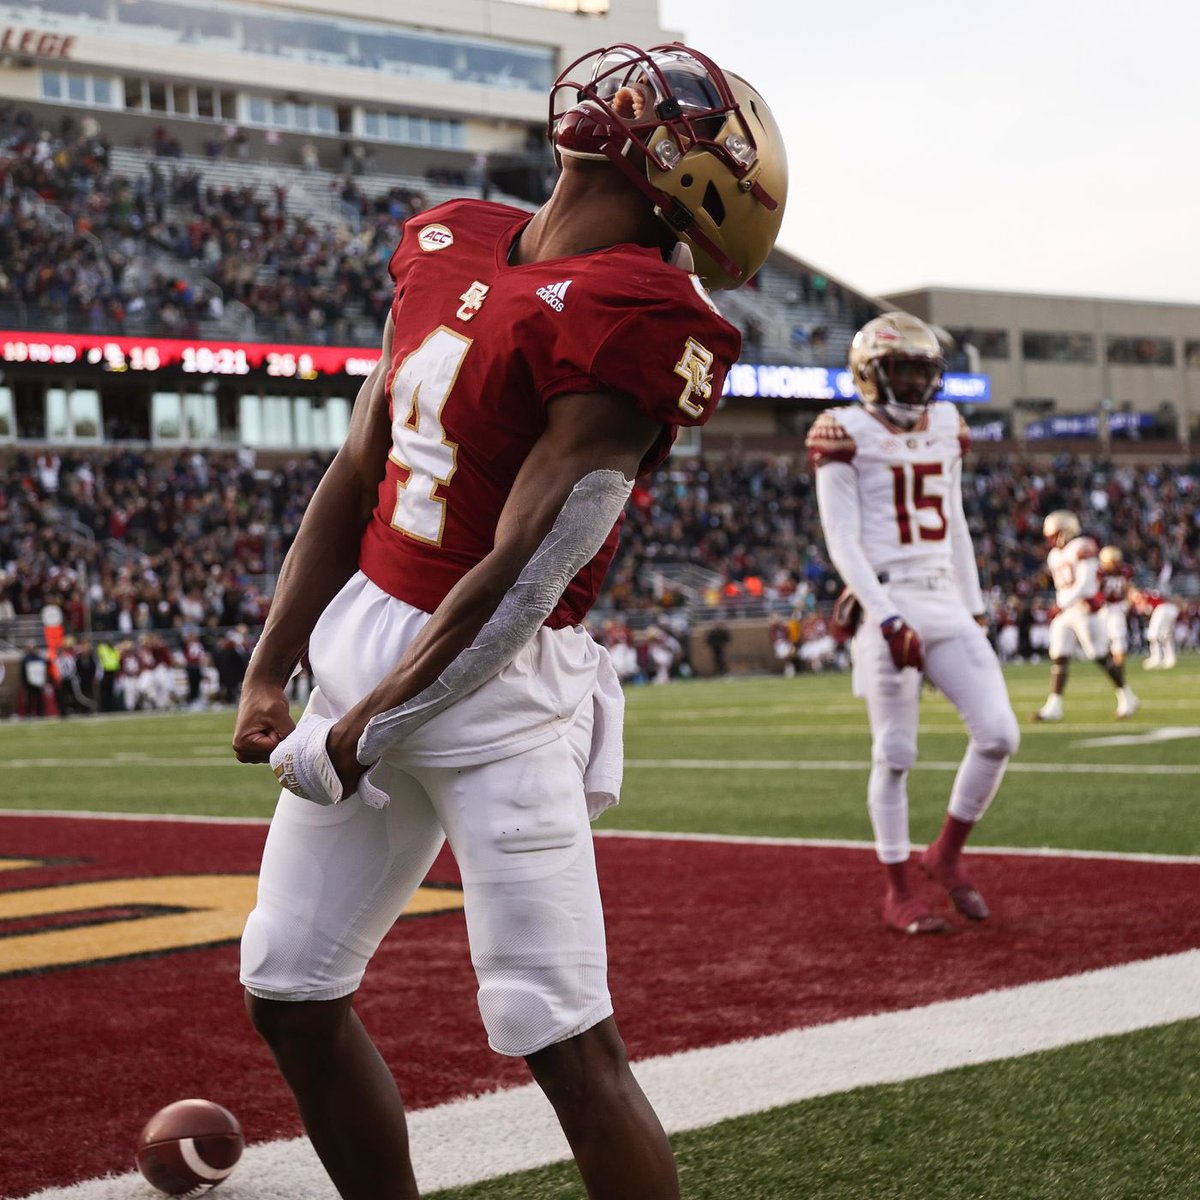 #AGTG After a great conversation with @CoachSHuggins I am extremely blessed to receive an offer from Boston College‼️ (@BCFootball)